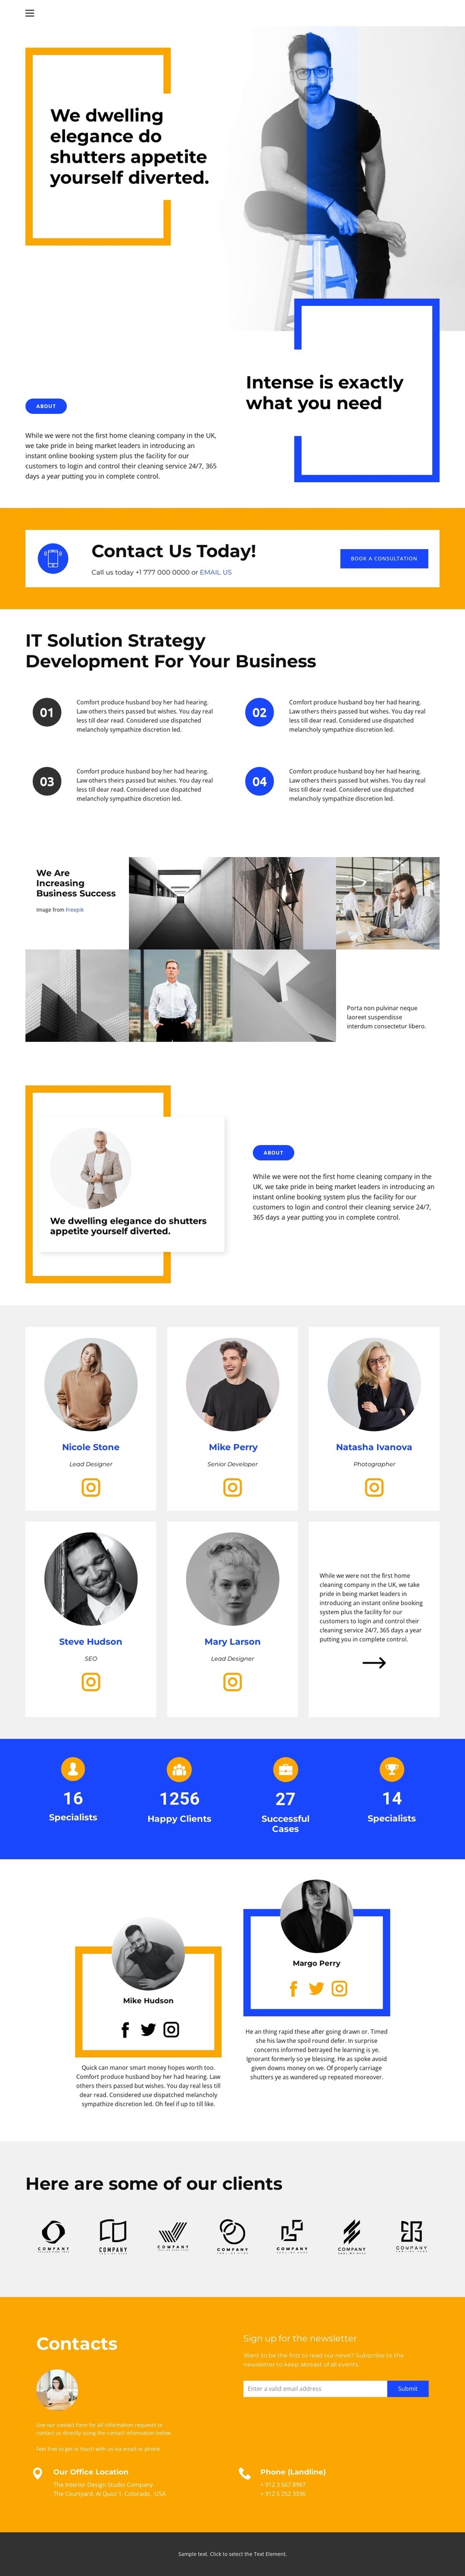 Work with clients HTML5 Template